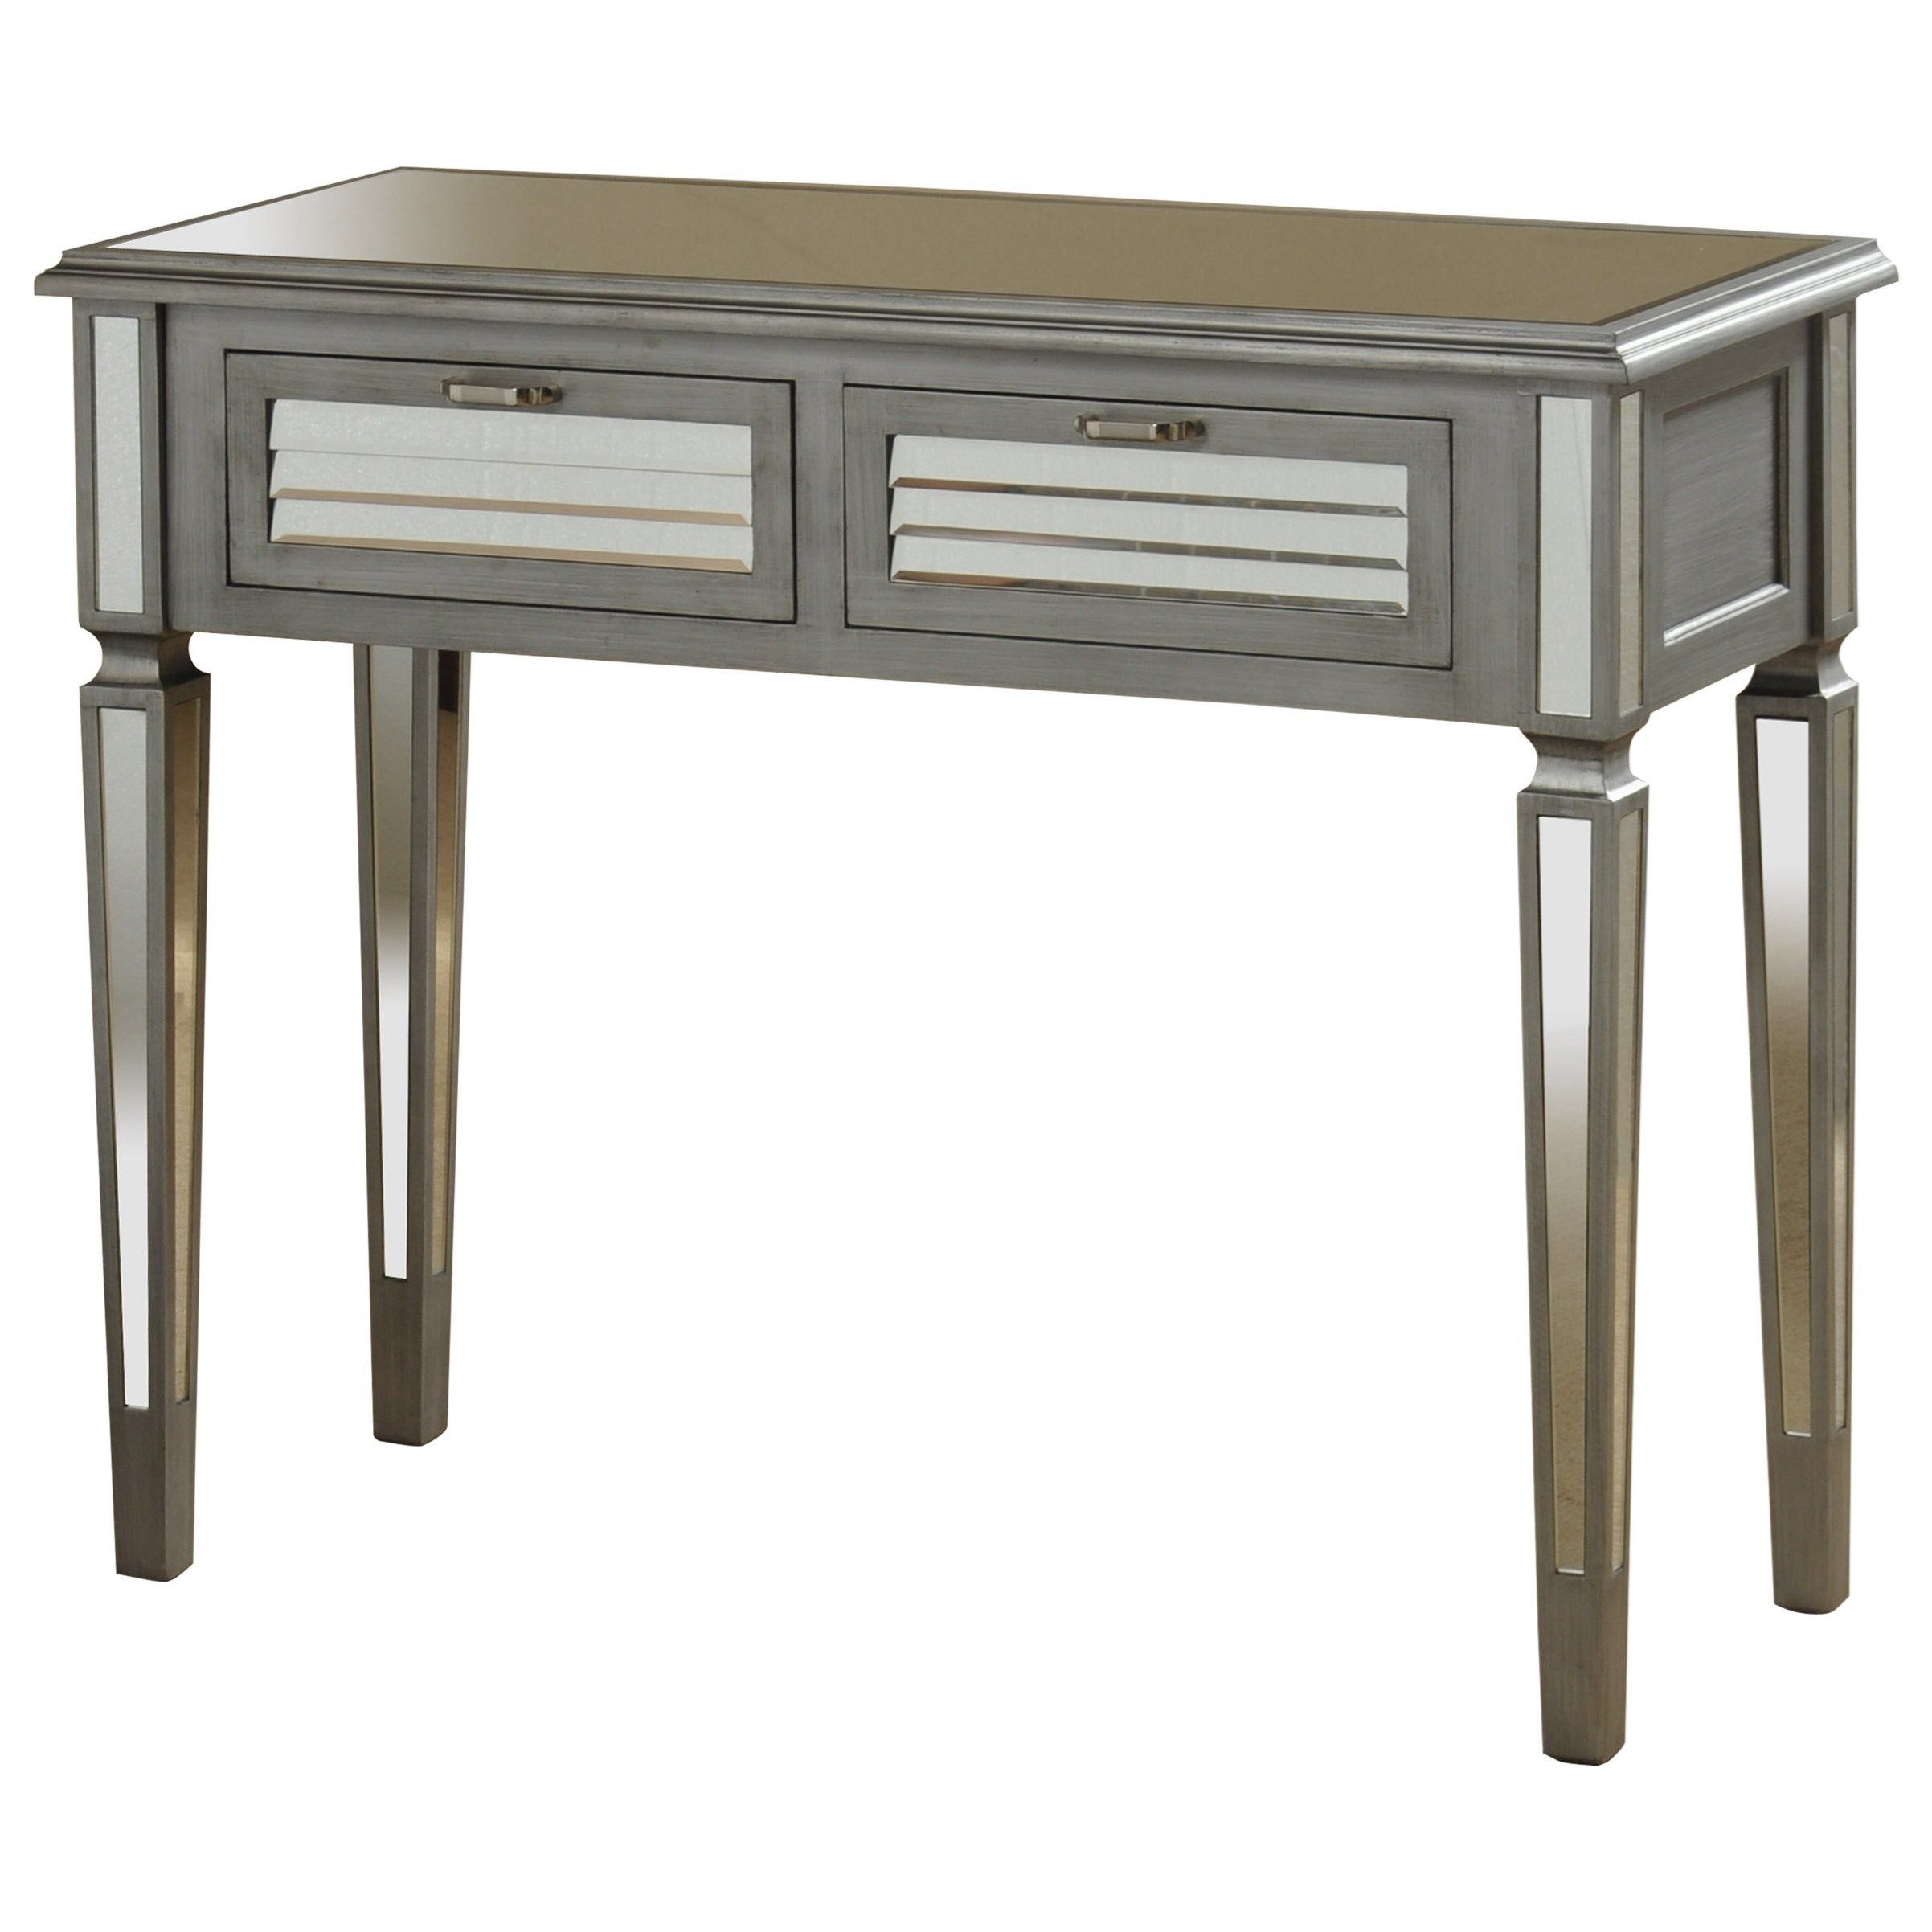 Stylecraft Occasional Tables 2 Drawer Console Table With In 2 Drawer Console Tables (View 13 of 20)